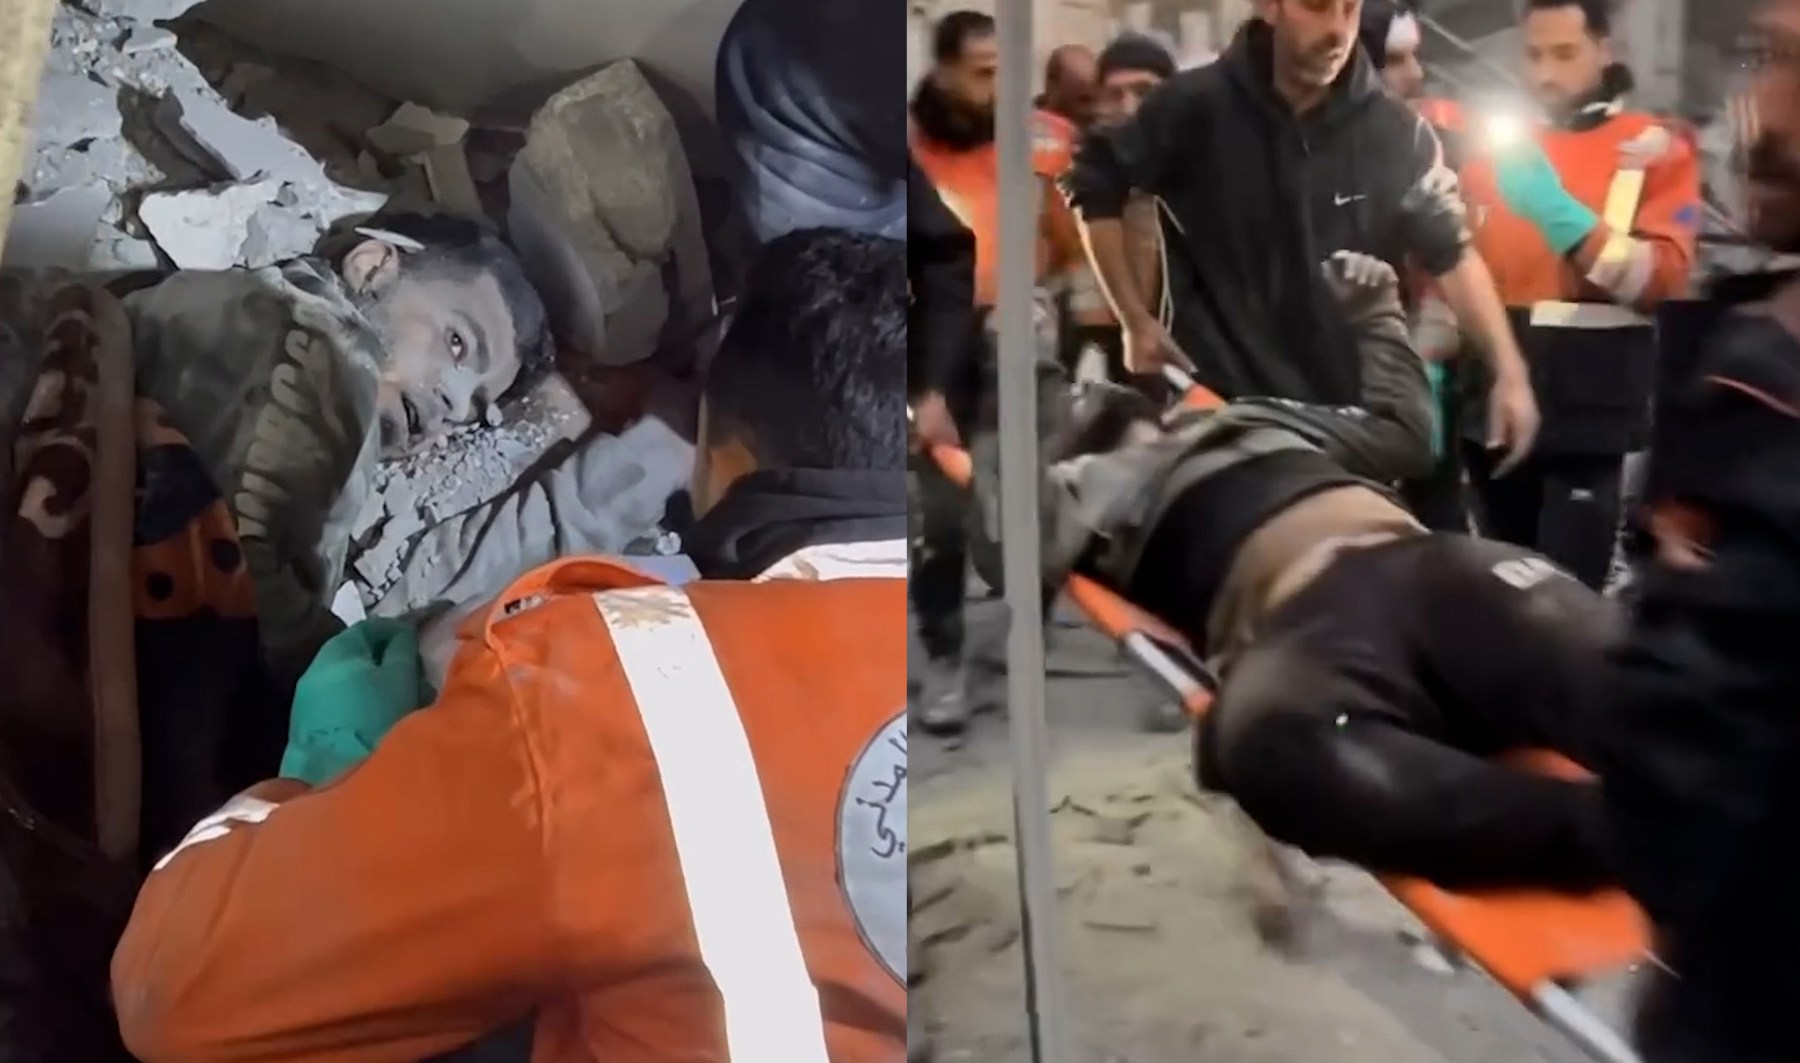 Palestinian woman buried under rubble calls for help after Israeli attack | Gaza